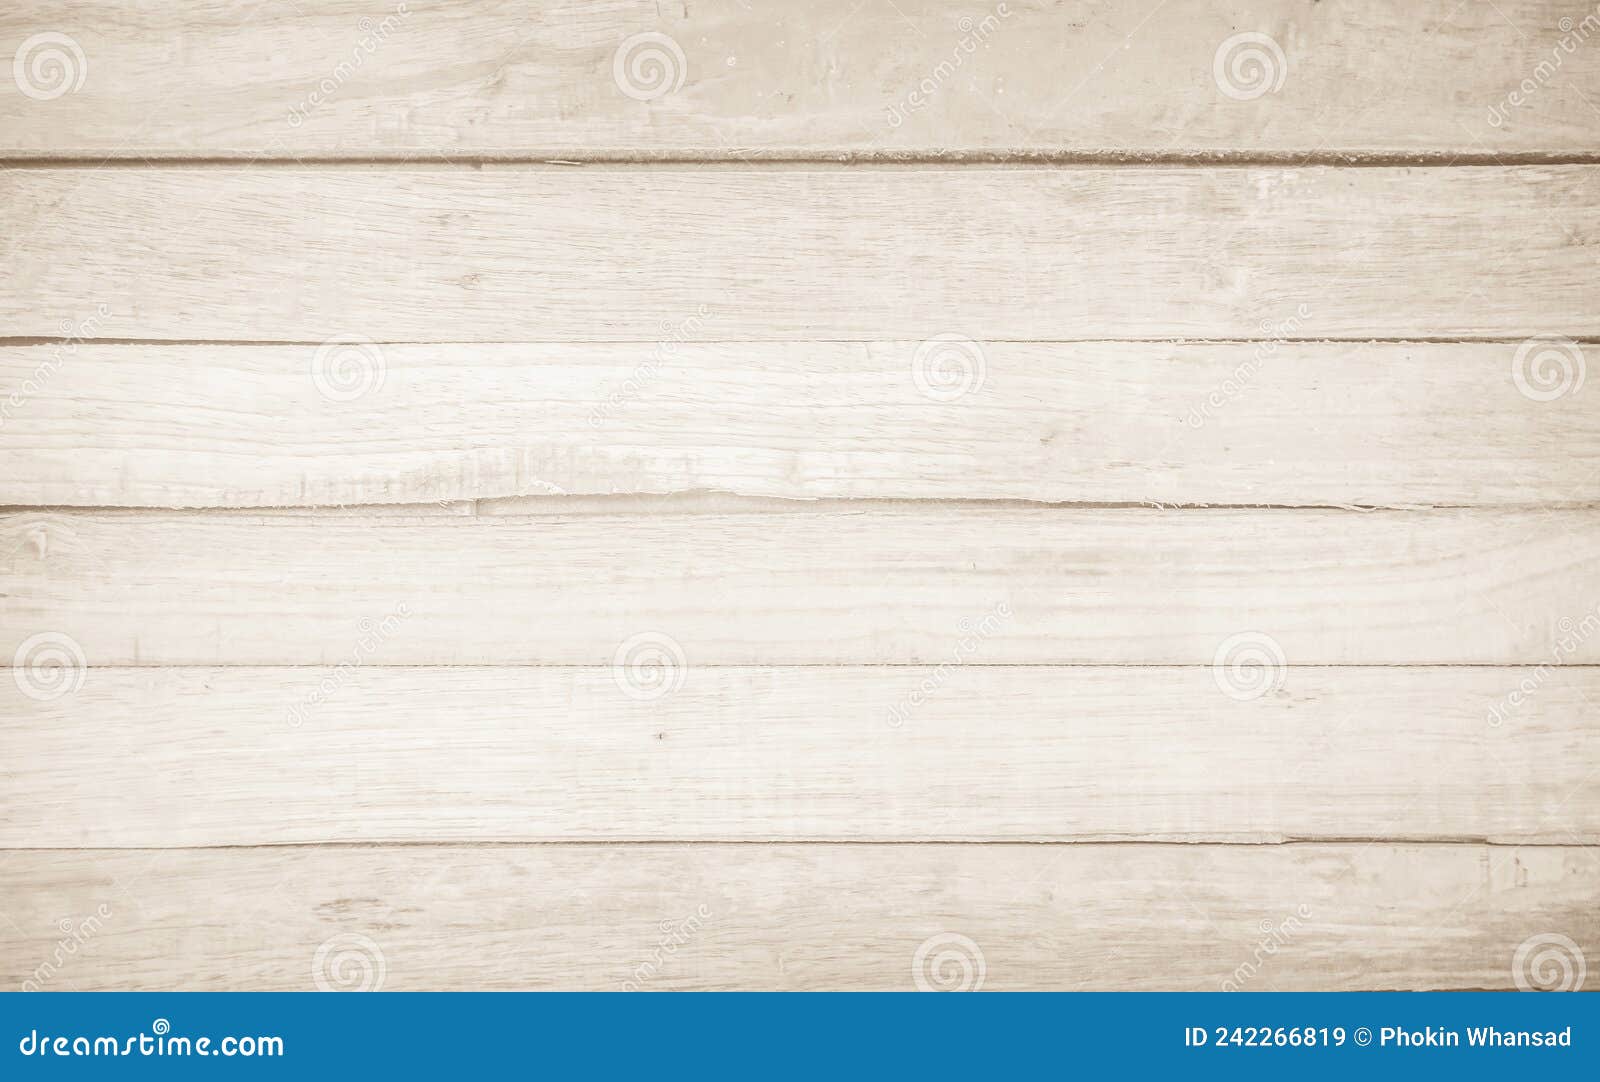 brown wood texture background. wooden planks old of table top view and board nature pattern are grain hardwood panel floor. 